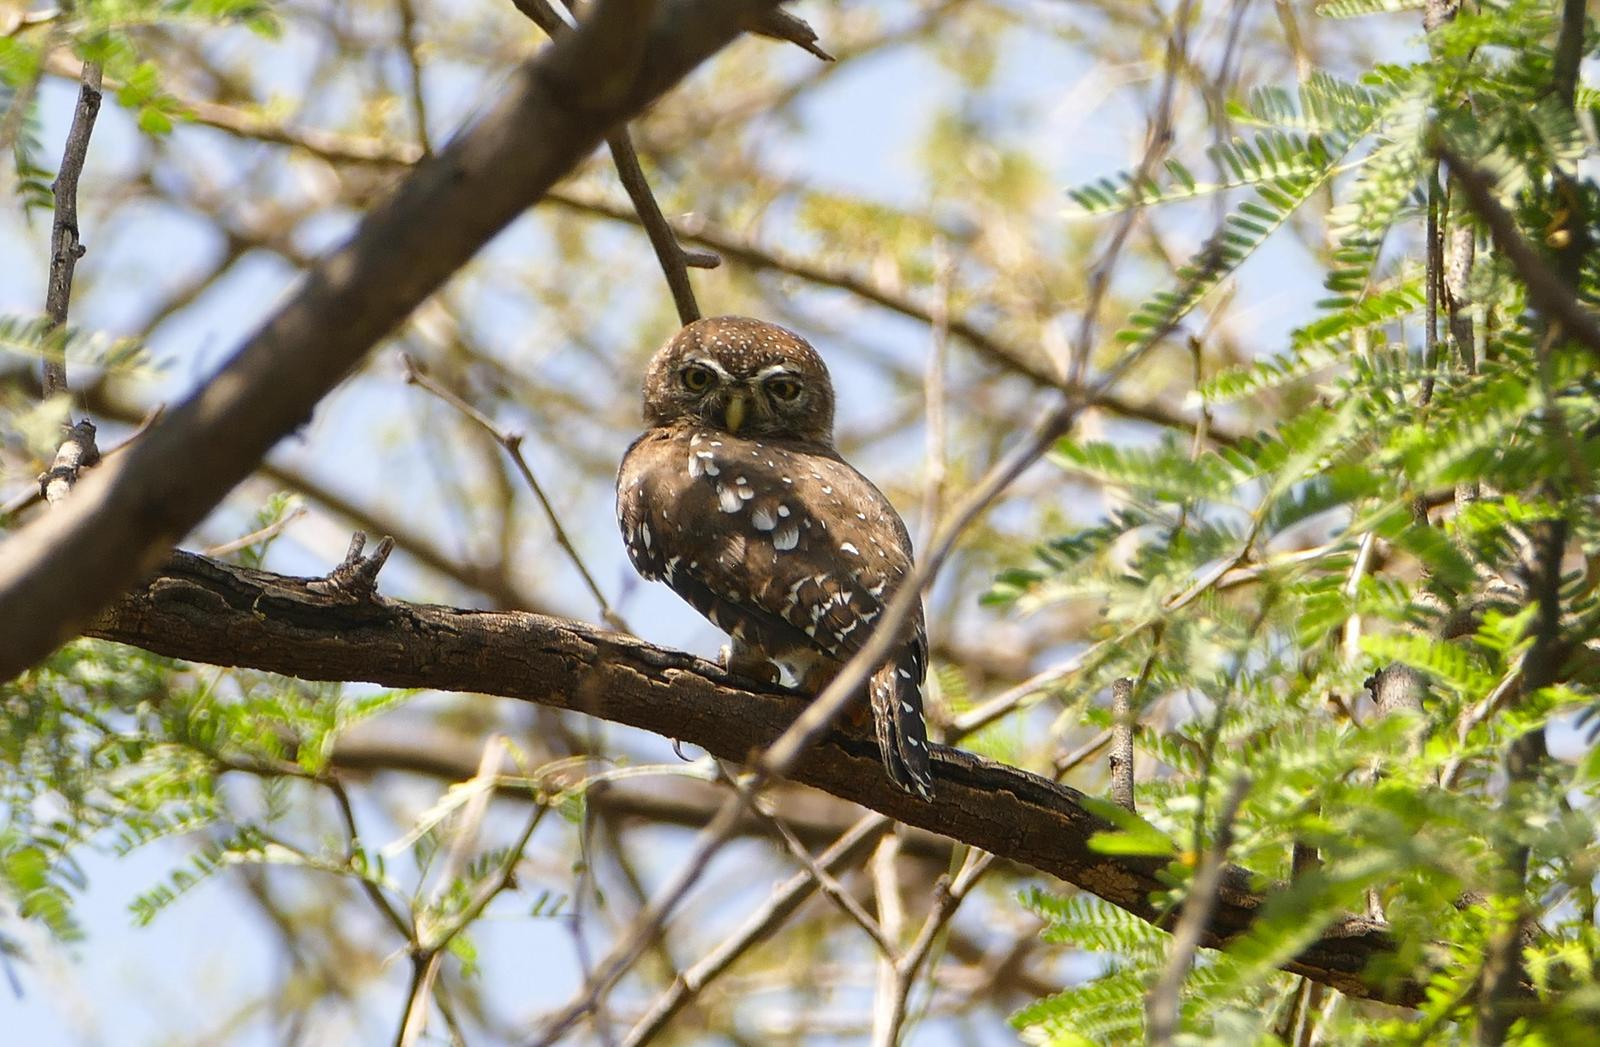 Pearl-spotted Owlet Photo by Randy Siebert